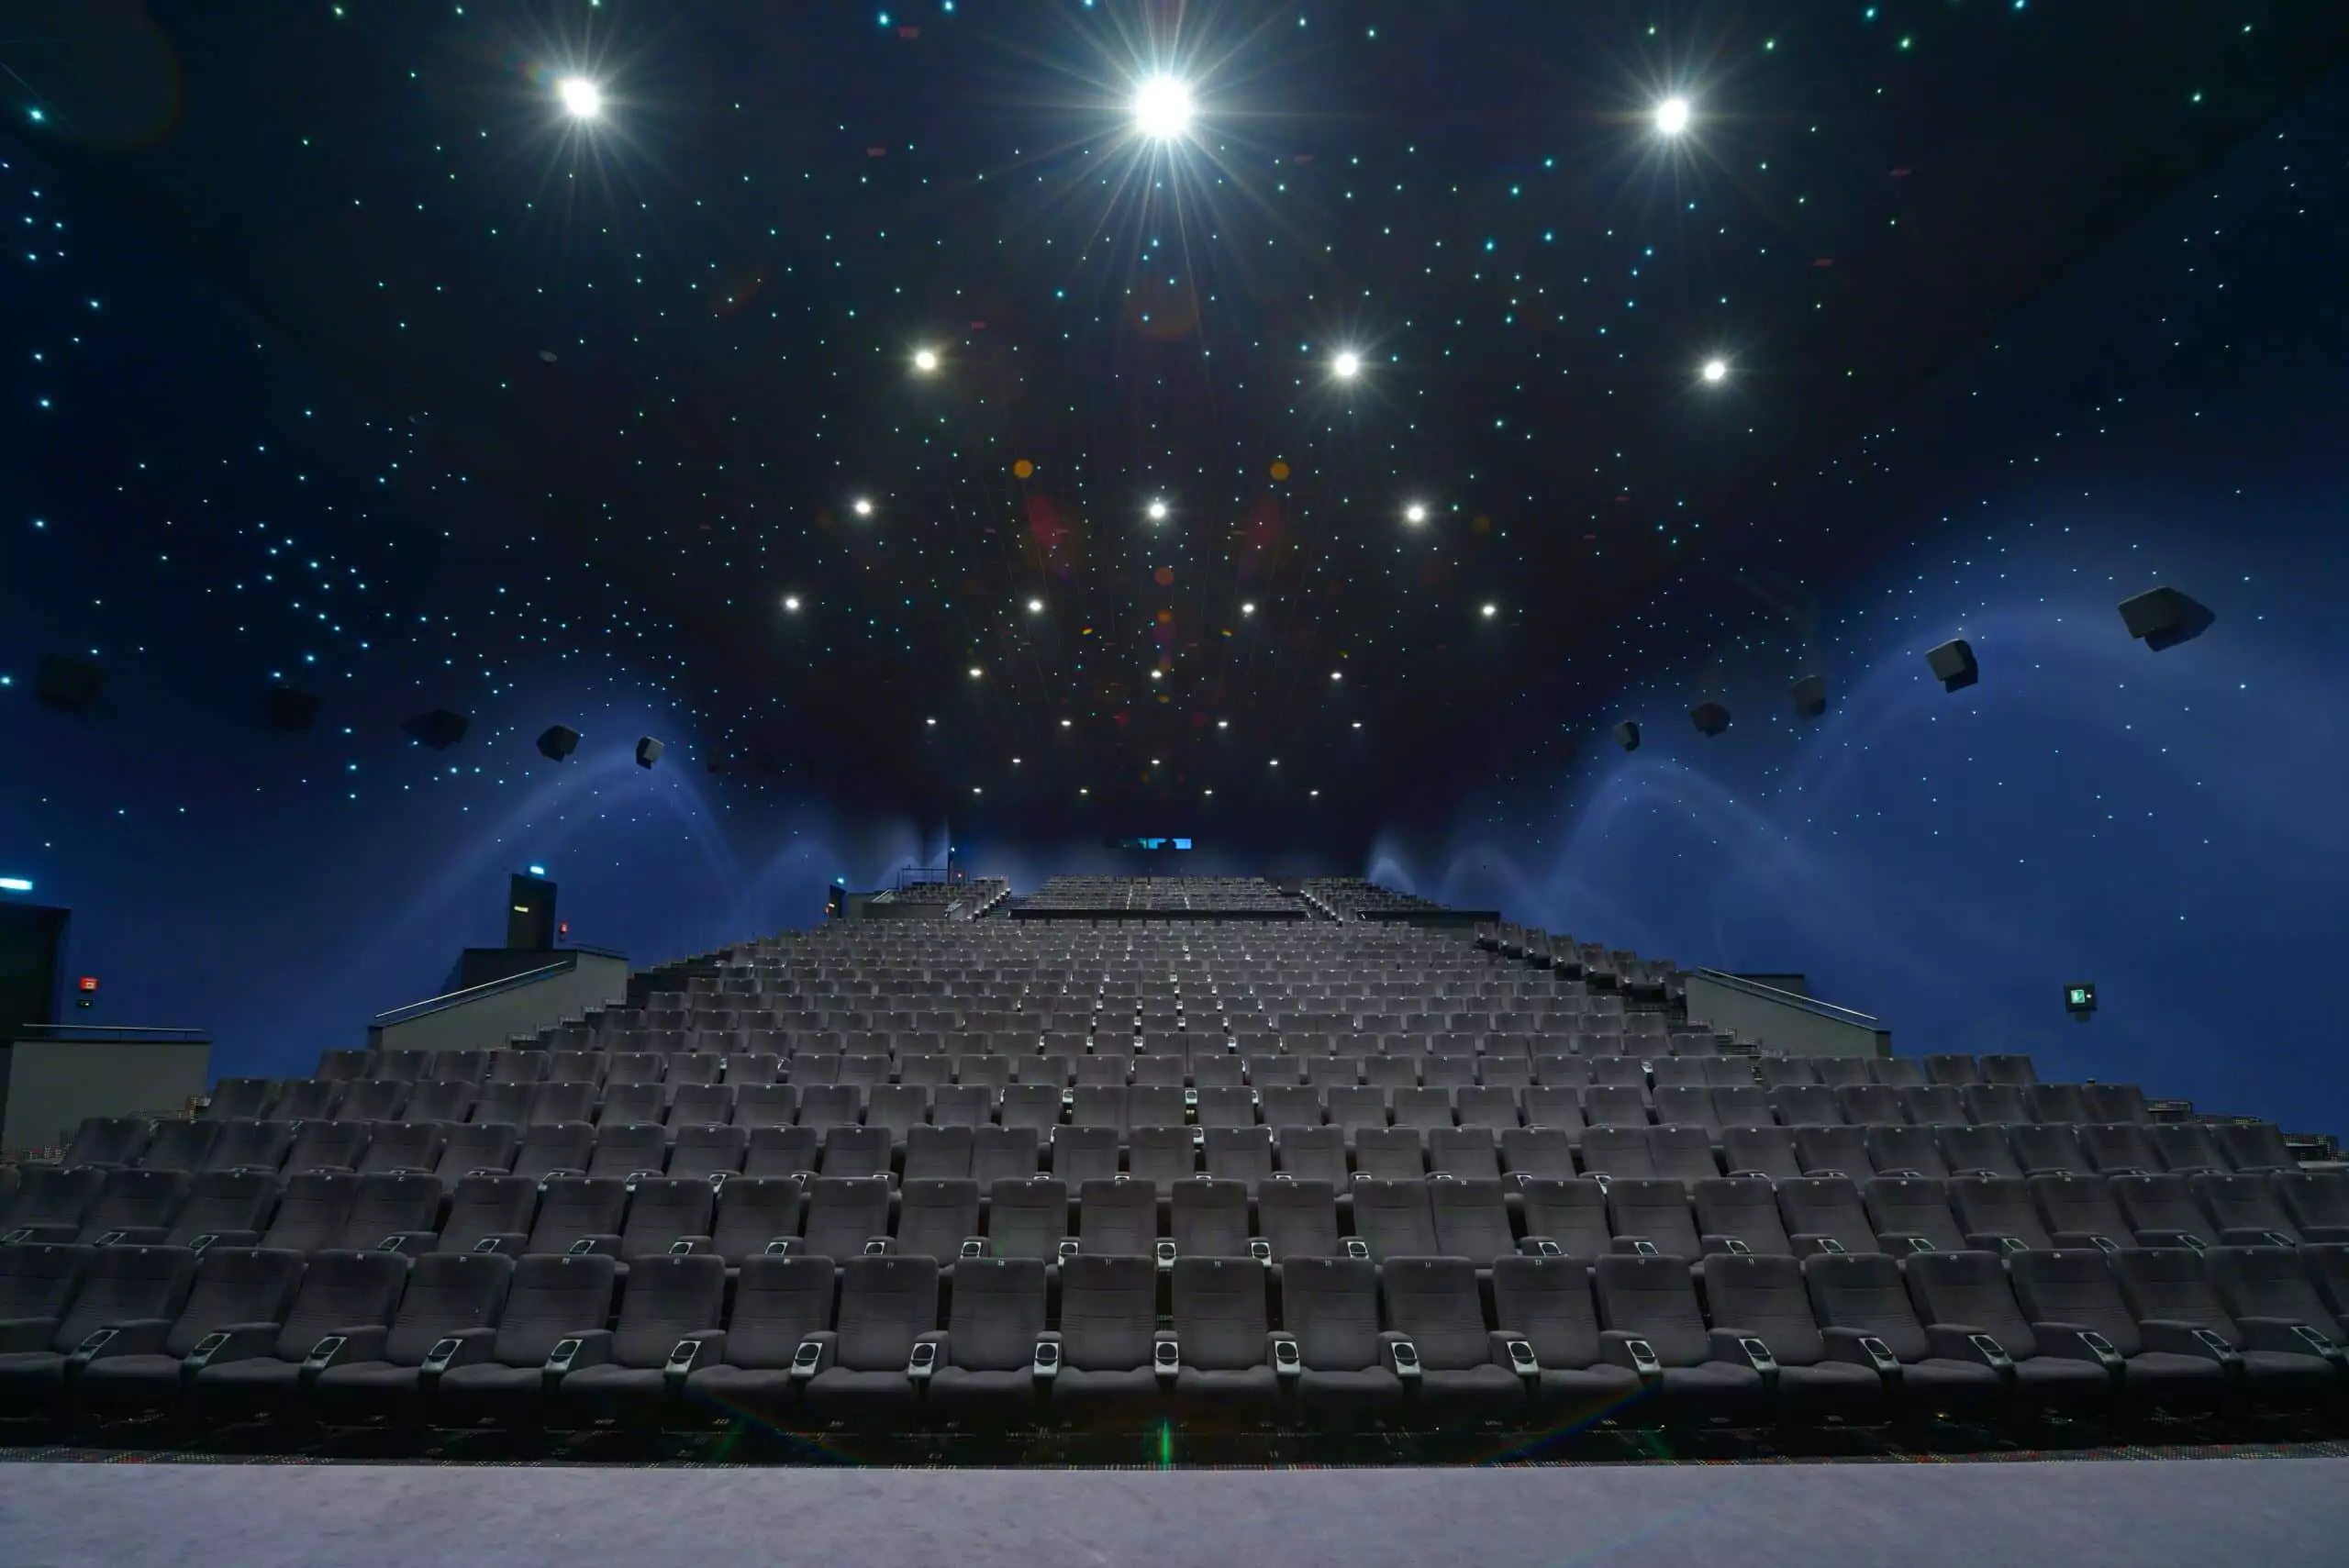 Cinema Seating Projects Image